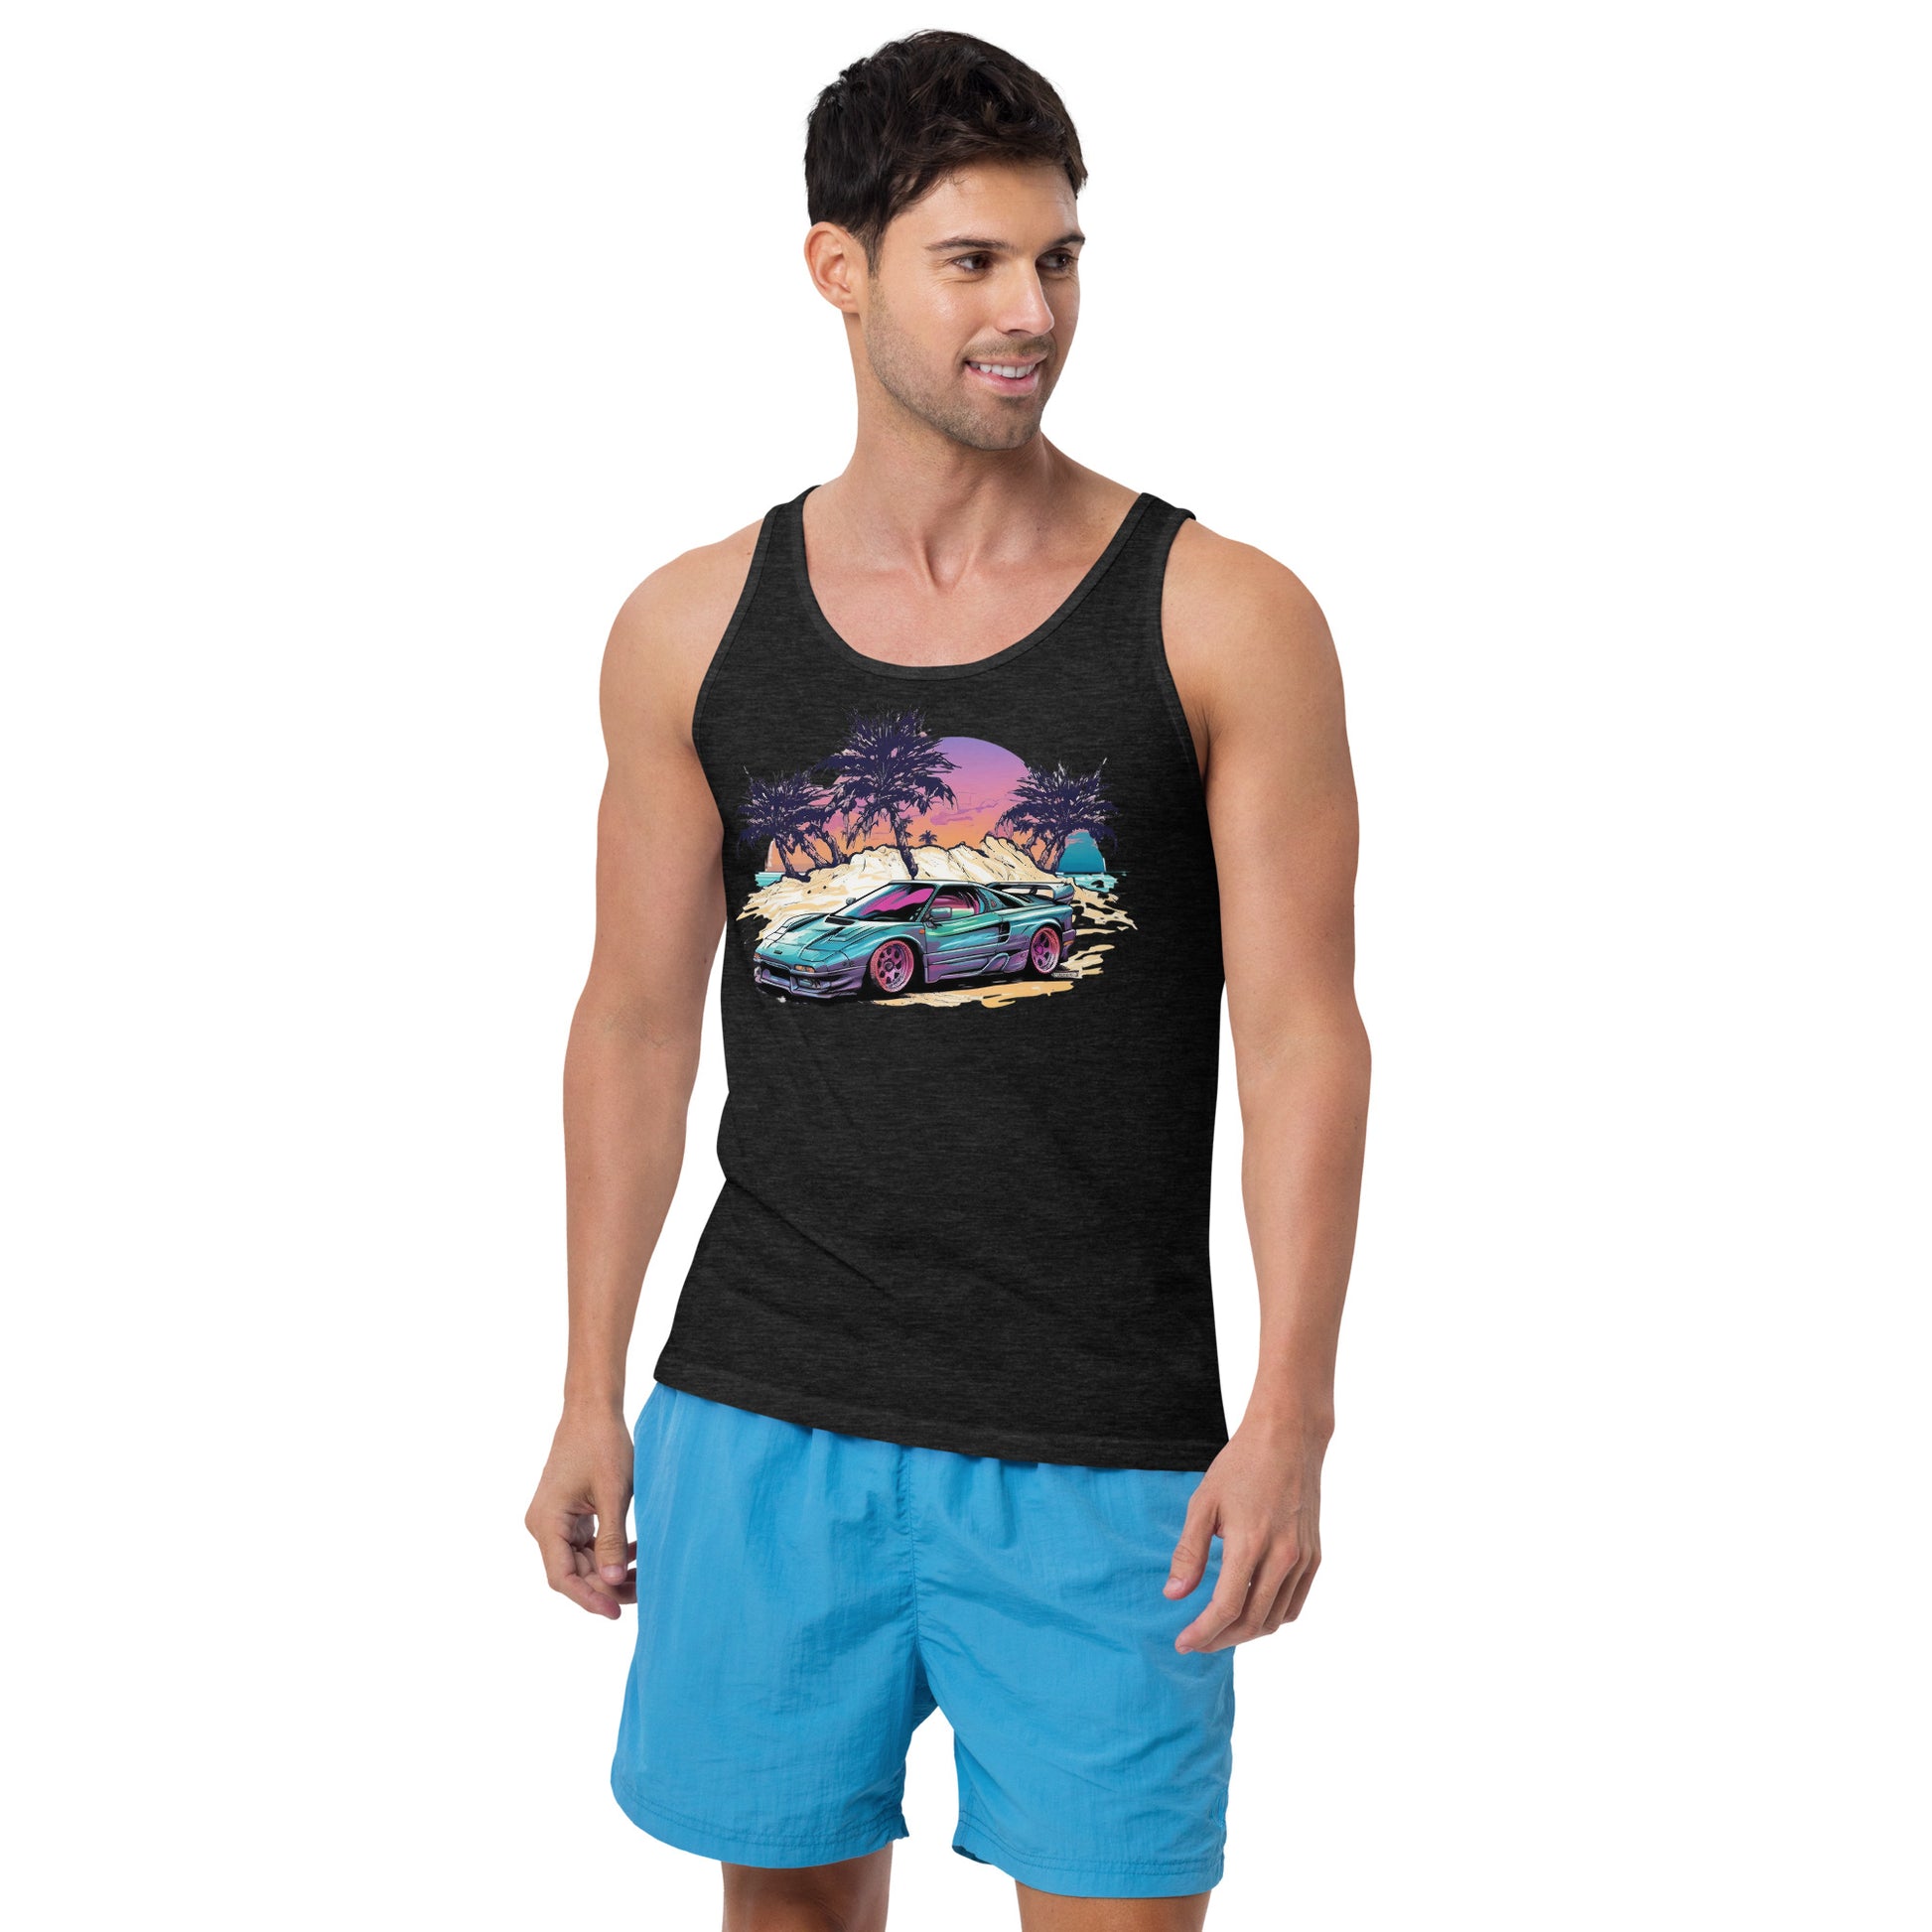 man with black tank top with picture of vintage car in front of palm trees 